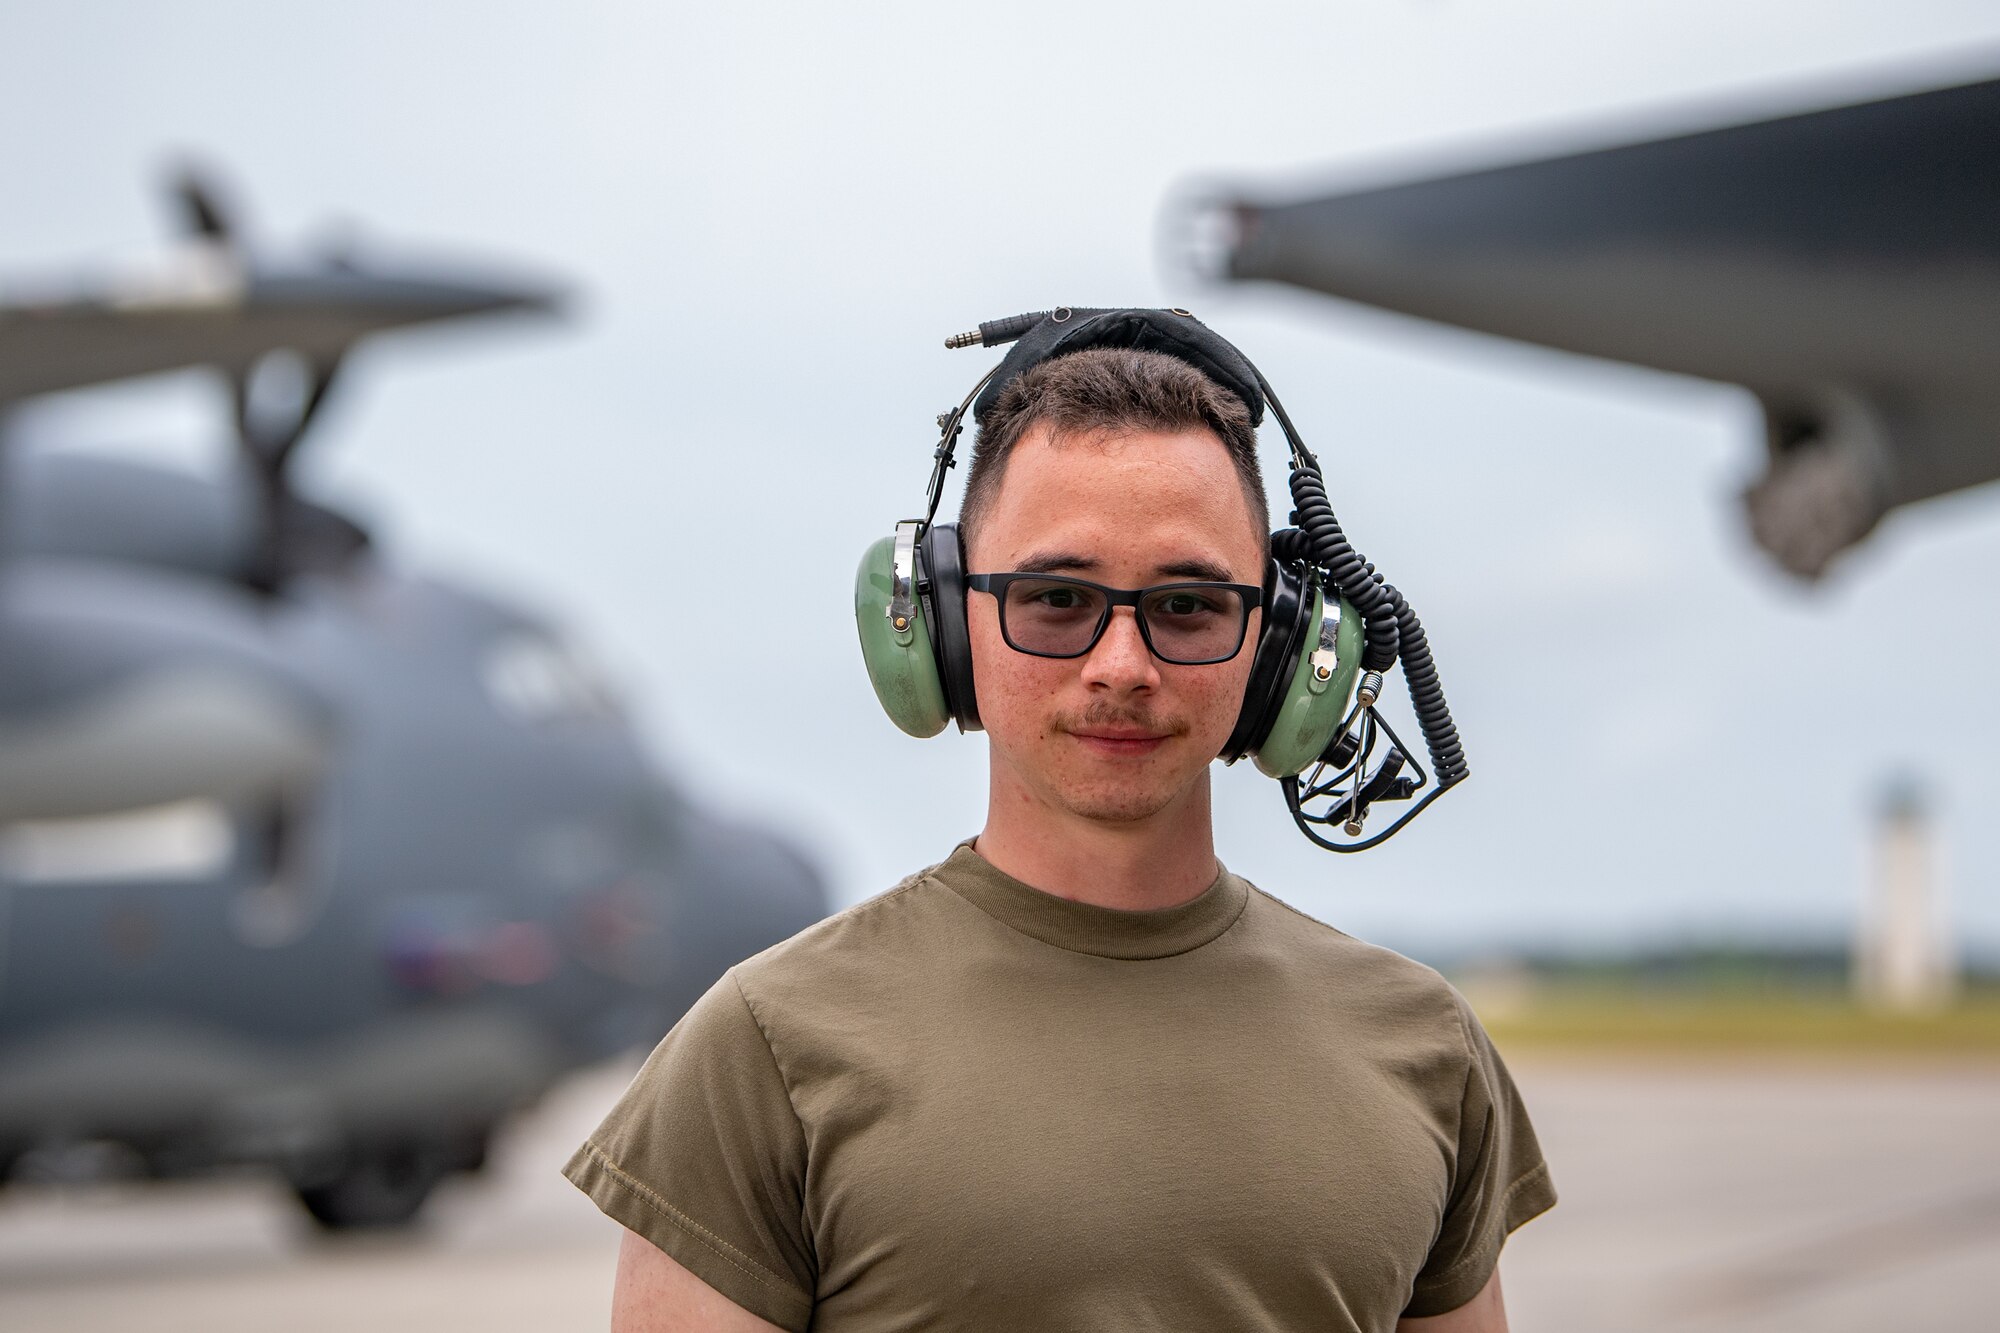 U.S. Air Force Airman 1st Class Kai Pfeiff, 71st Rescue Generation Squadron avionics craftsman, poses for a photo during Exercise Ready Tiger 24-1 at Savannah Air National Guard Base, Georgia, April 10, 2024. During Ready Tiger 24-1, the 23rd Wing will be evaluated on the integration of Air Force Force Generation principles such as Agile Combat Employment, integrated combat turns, forward aerial refueling points, multi-capable Airmen, and combat search and rescue capabilities. (U.S. Air Force photo by Senior Airman Courtney Sebastianelli)